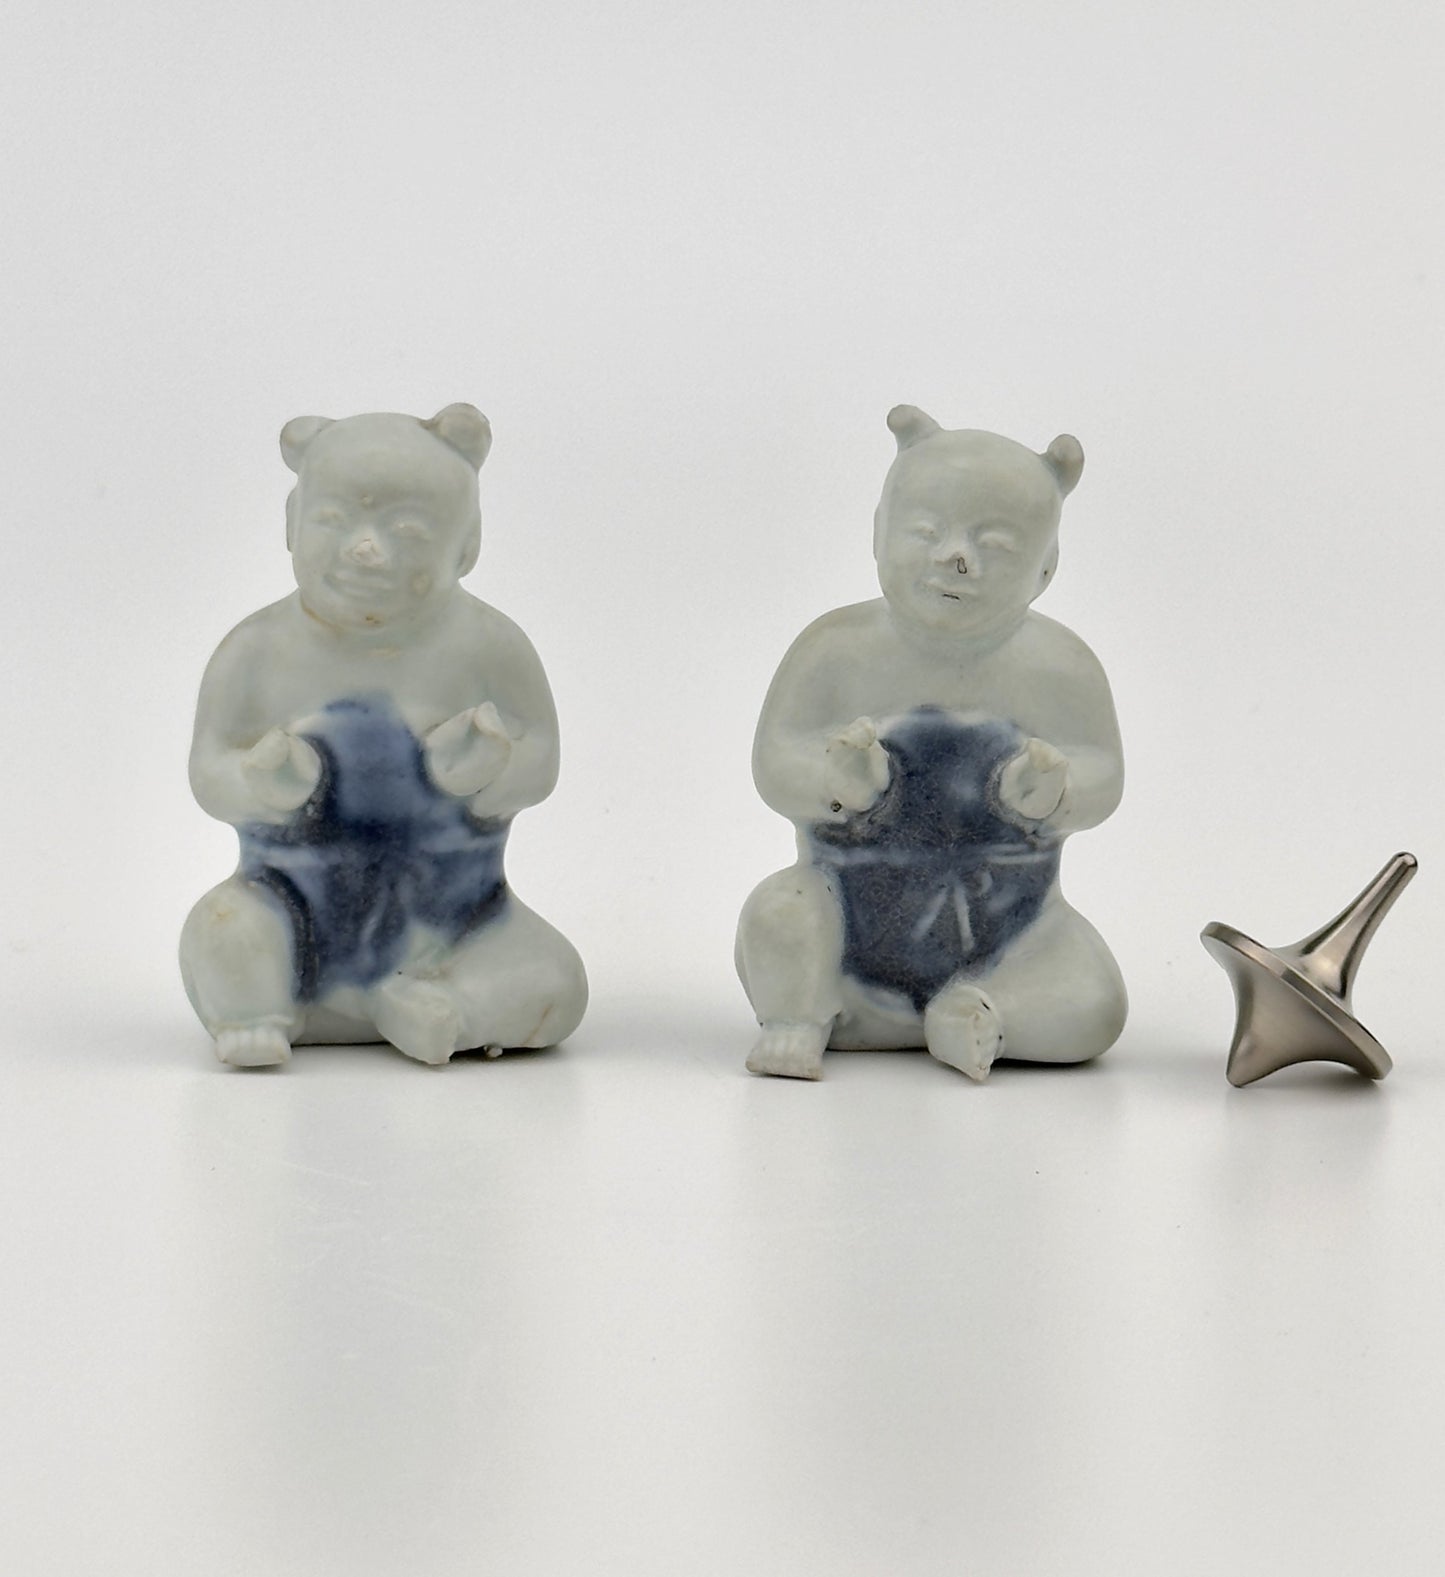 TWO FIGURINE OF SEATED BOYS, CIRCA 1725, QING DYNASTY, YONGZHENG REIGN